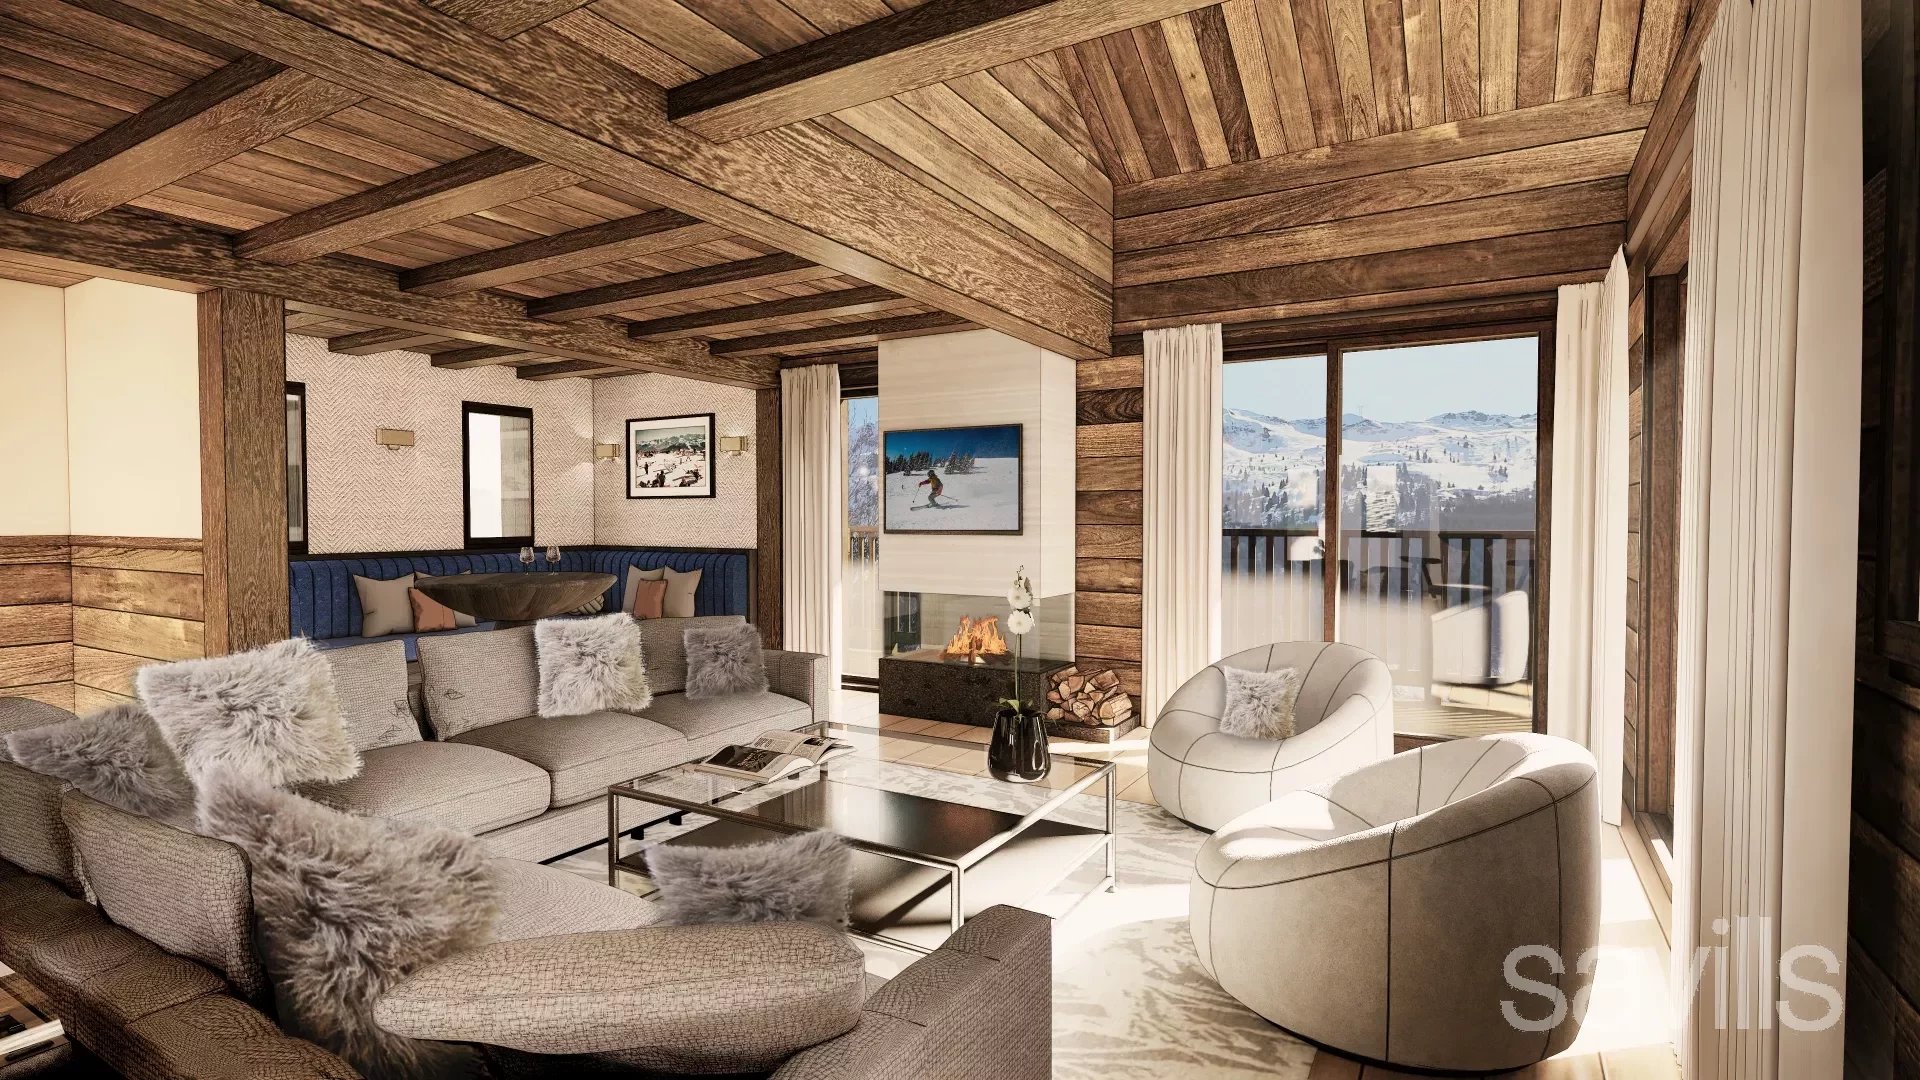 Stunning new chalet with breathtaking views of the surrounding peaks.